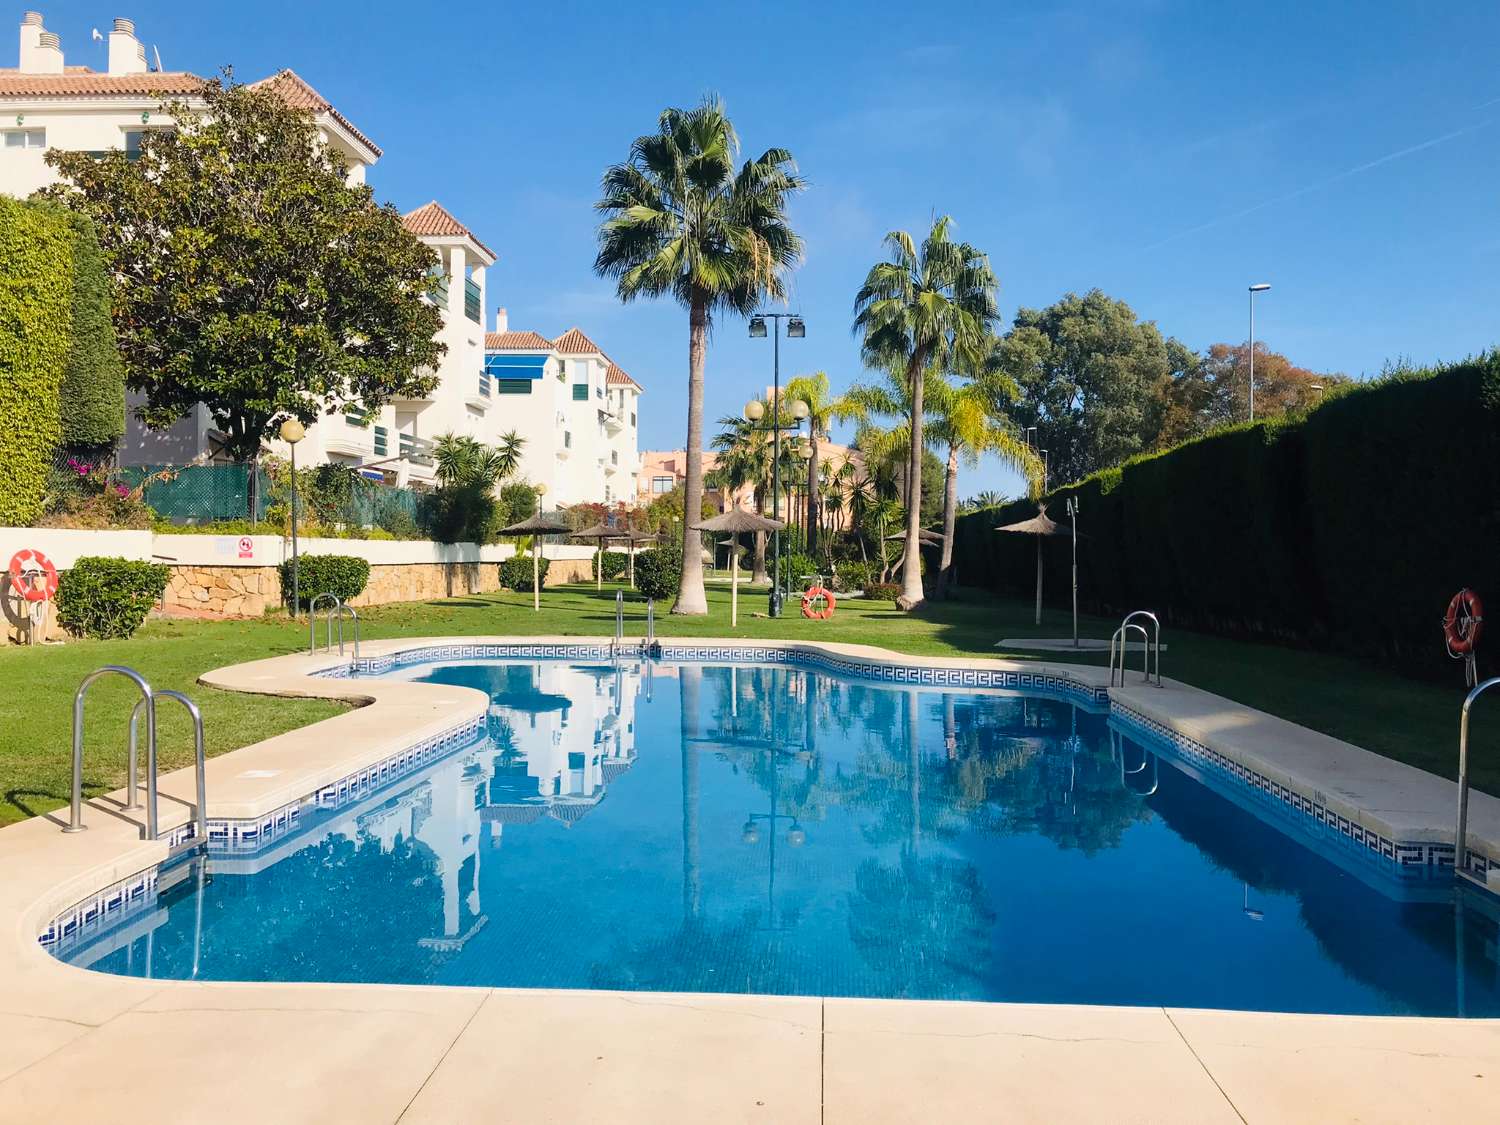 Charming Apartment For Sale. Convenient Location Nearby Puerto Banus, Marbella.